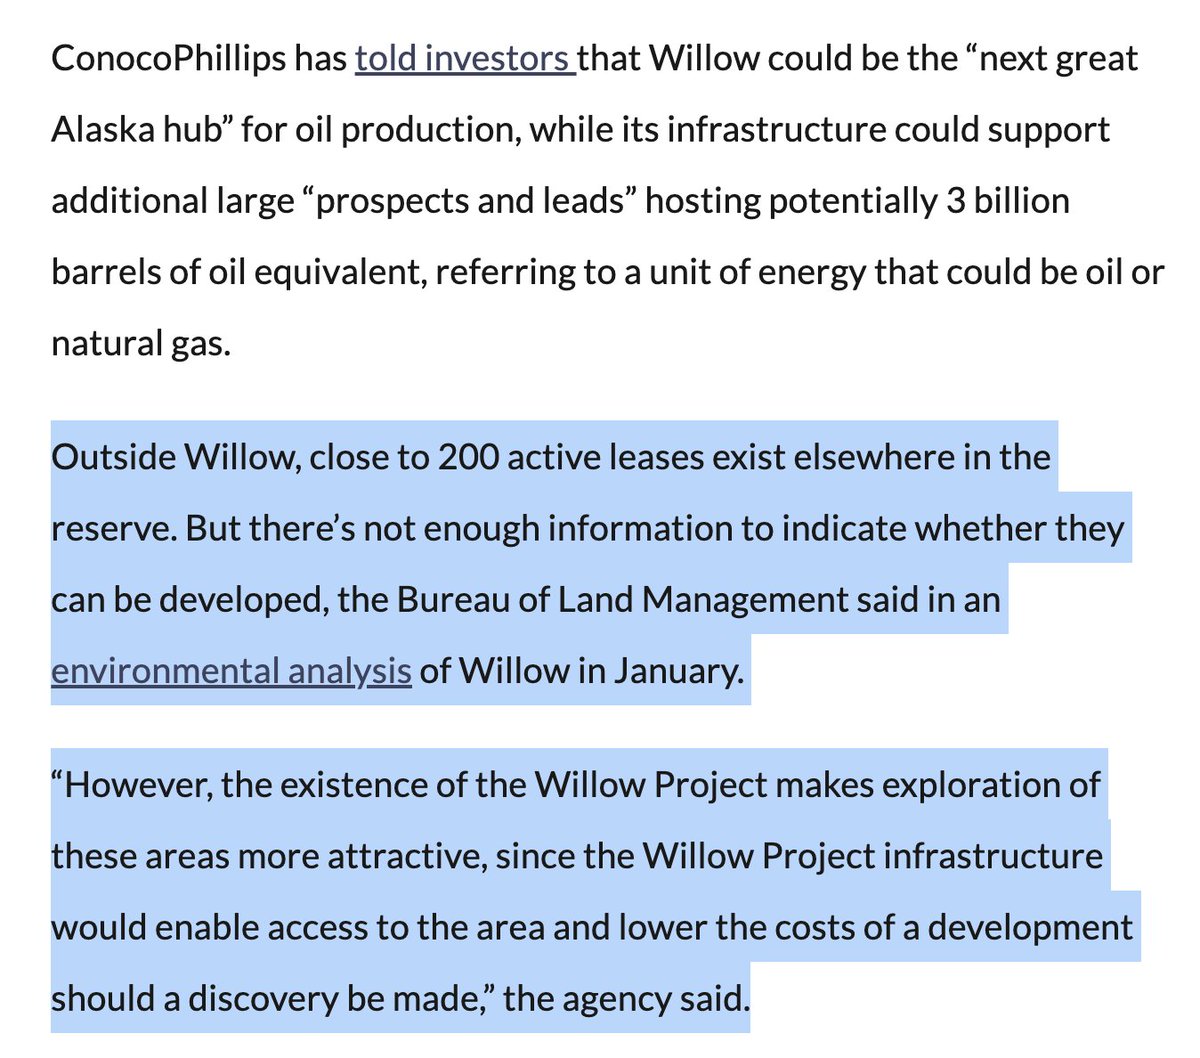 One of the most important aspects of the Willow project is the fact that it will open the door to additional oil & gas development in the Western Arctic. This story provides a glimpse of what that might look like, and if you care about the planet, why it matters.